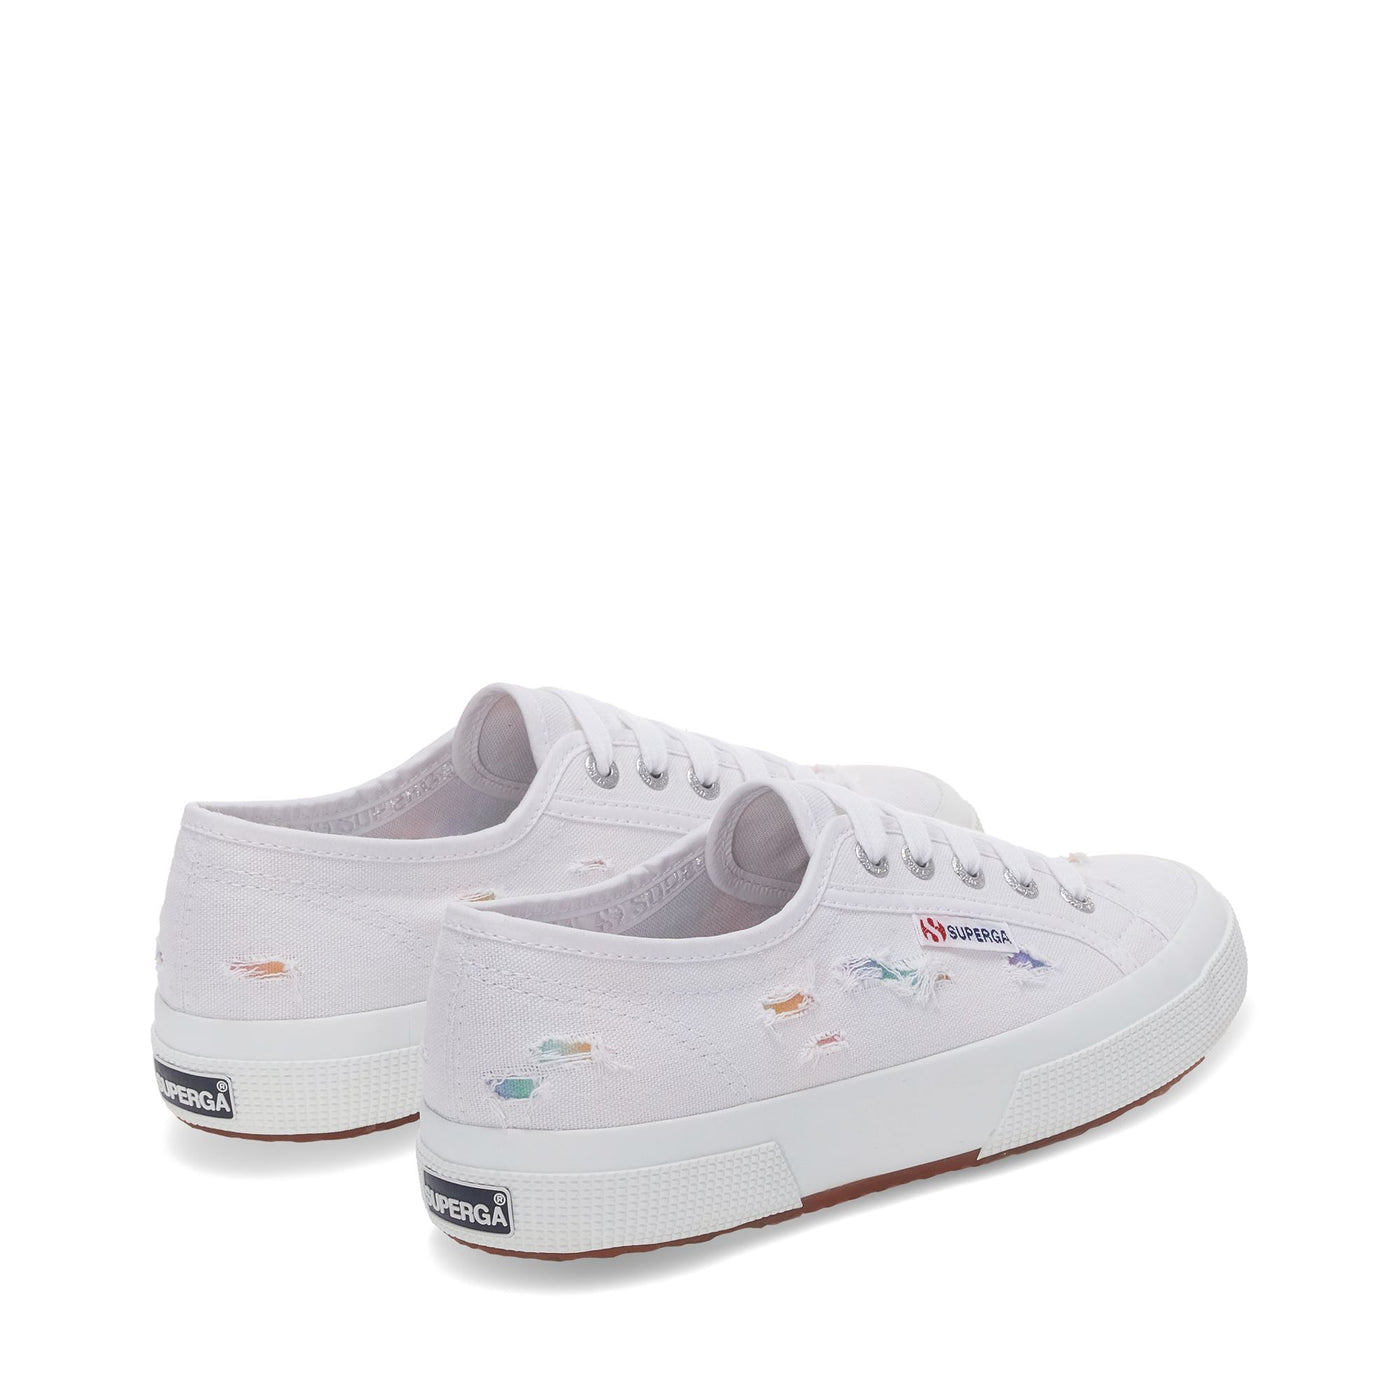 Le Superga Woman 2750 RIPPED MULTICOLOR COTTON Low Cut WHITE-MULTICOLOR SHADED PRINT Dressed Side (jpg Rgb)		